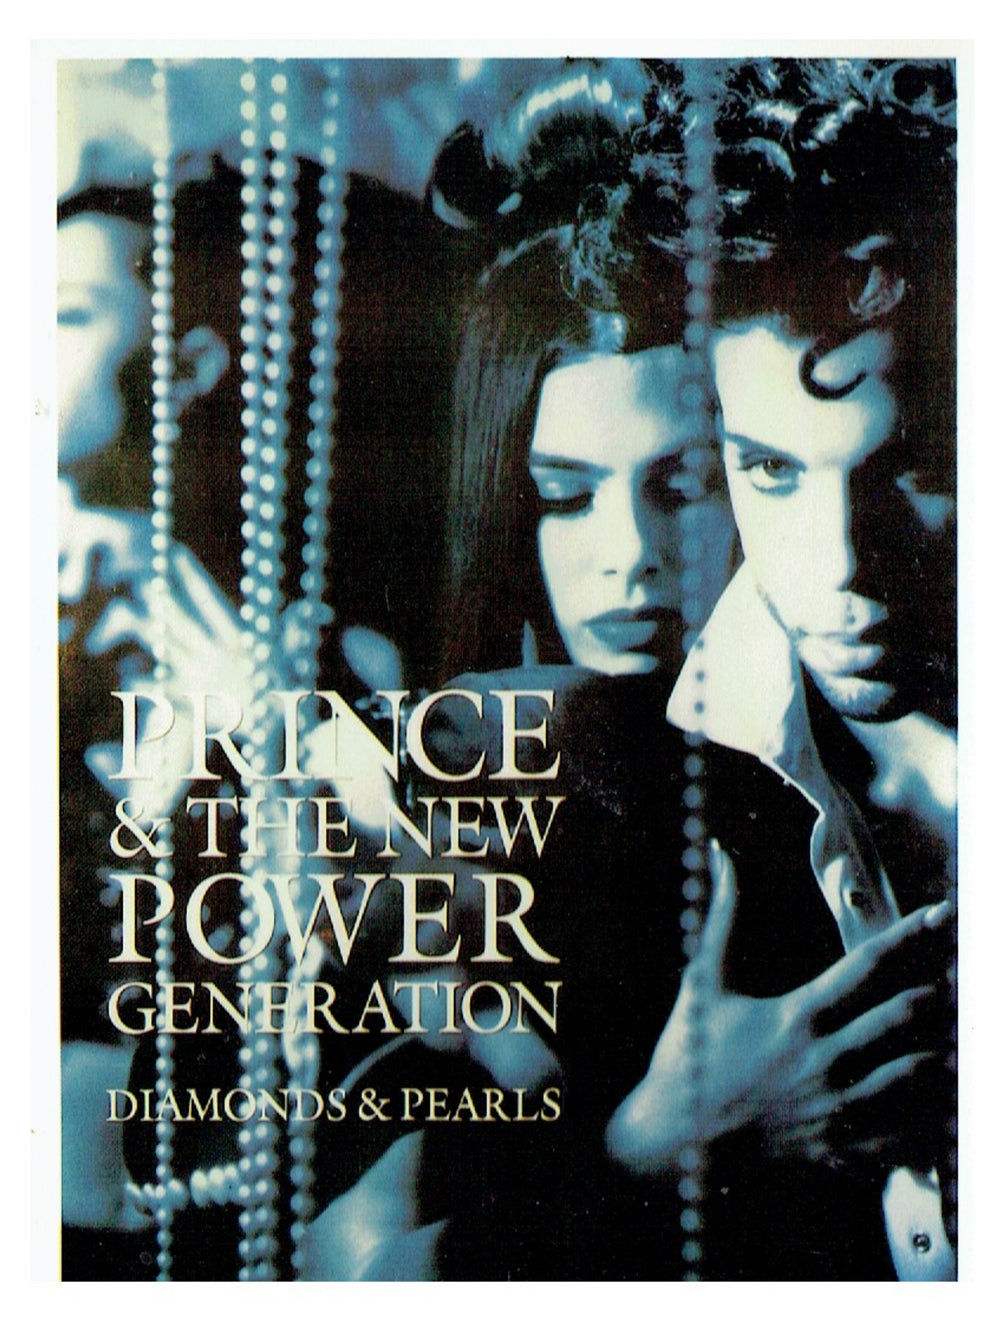 Prince – & The New Power Generation – Diamonds & Pearls Postcard Cover Preloved:1992